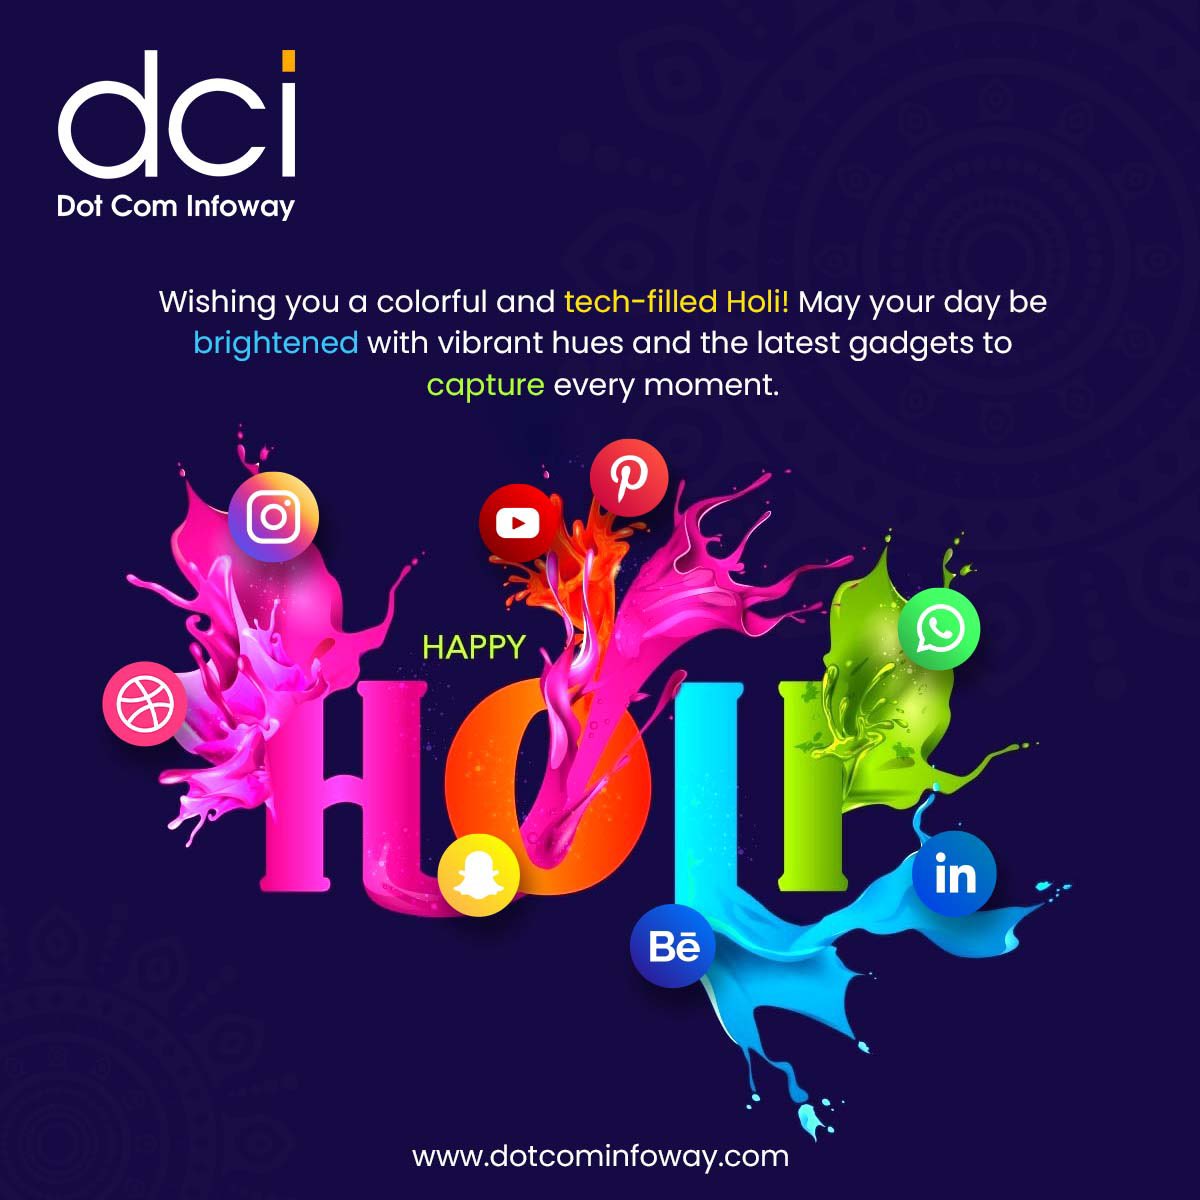 Happy Holi! 🌈 Embrace the colors and tech innovations this festive season! Let's capture every vibrant moment with the latest gadgets. #DotComInfoway #HappyHoli #ColorfulCelebration #TechFilledHoli #CaptureTheMoment #VibrantMemories #FestivalOfColors